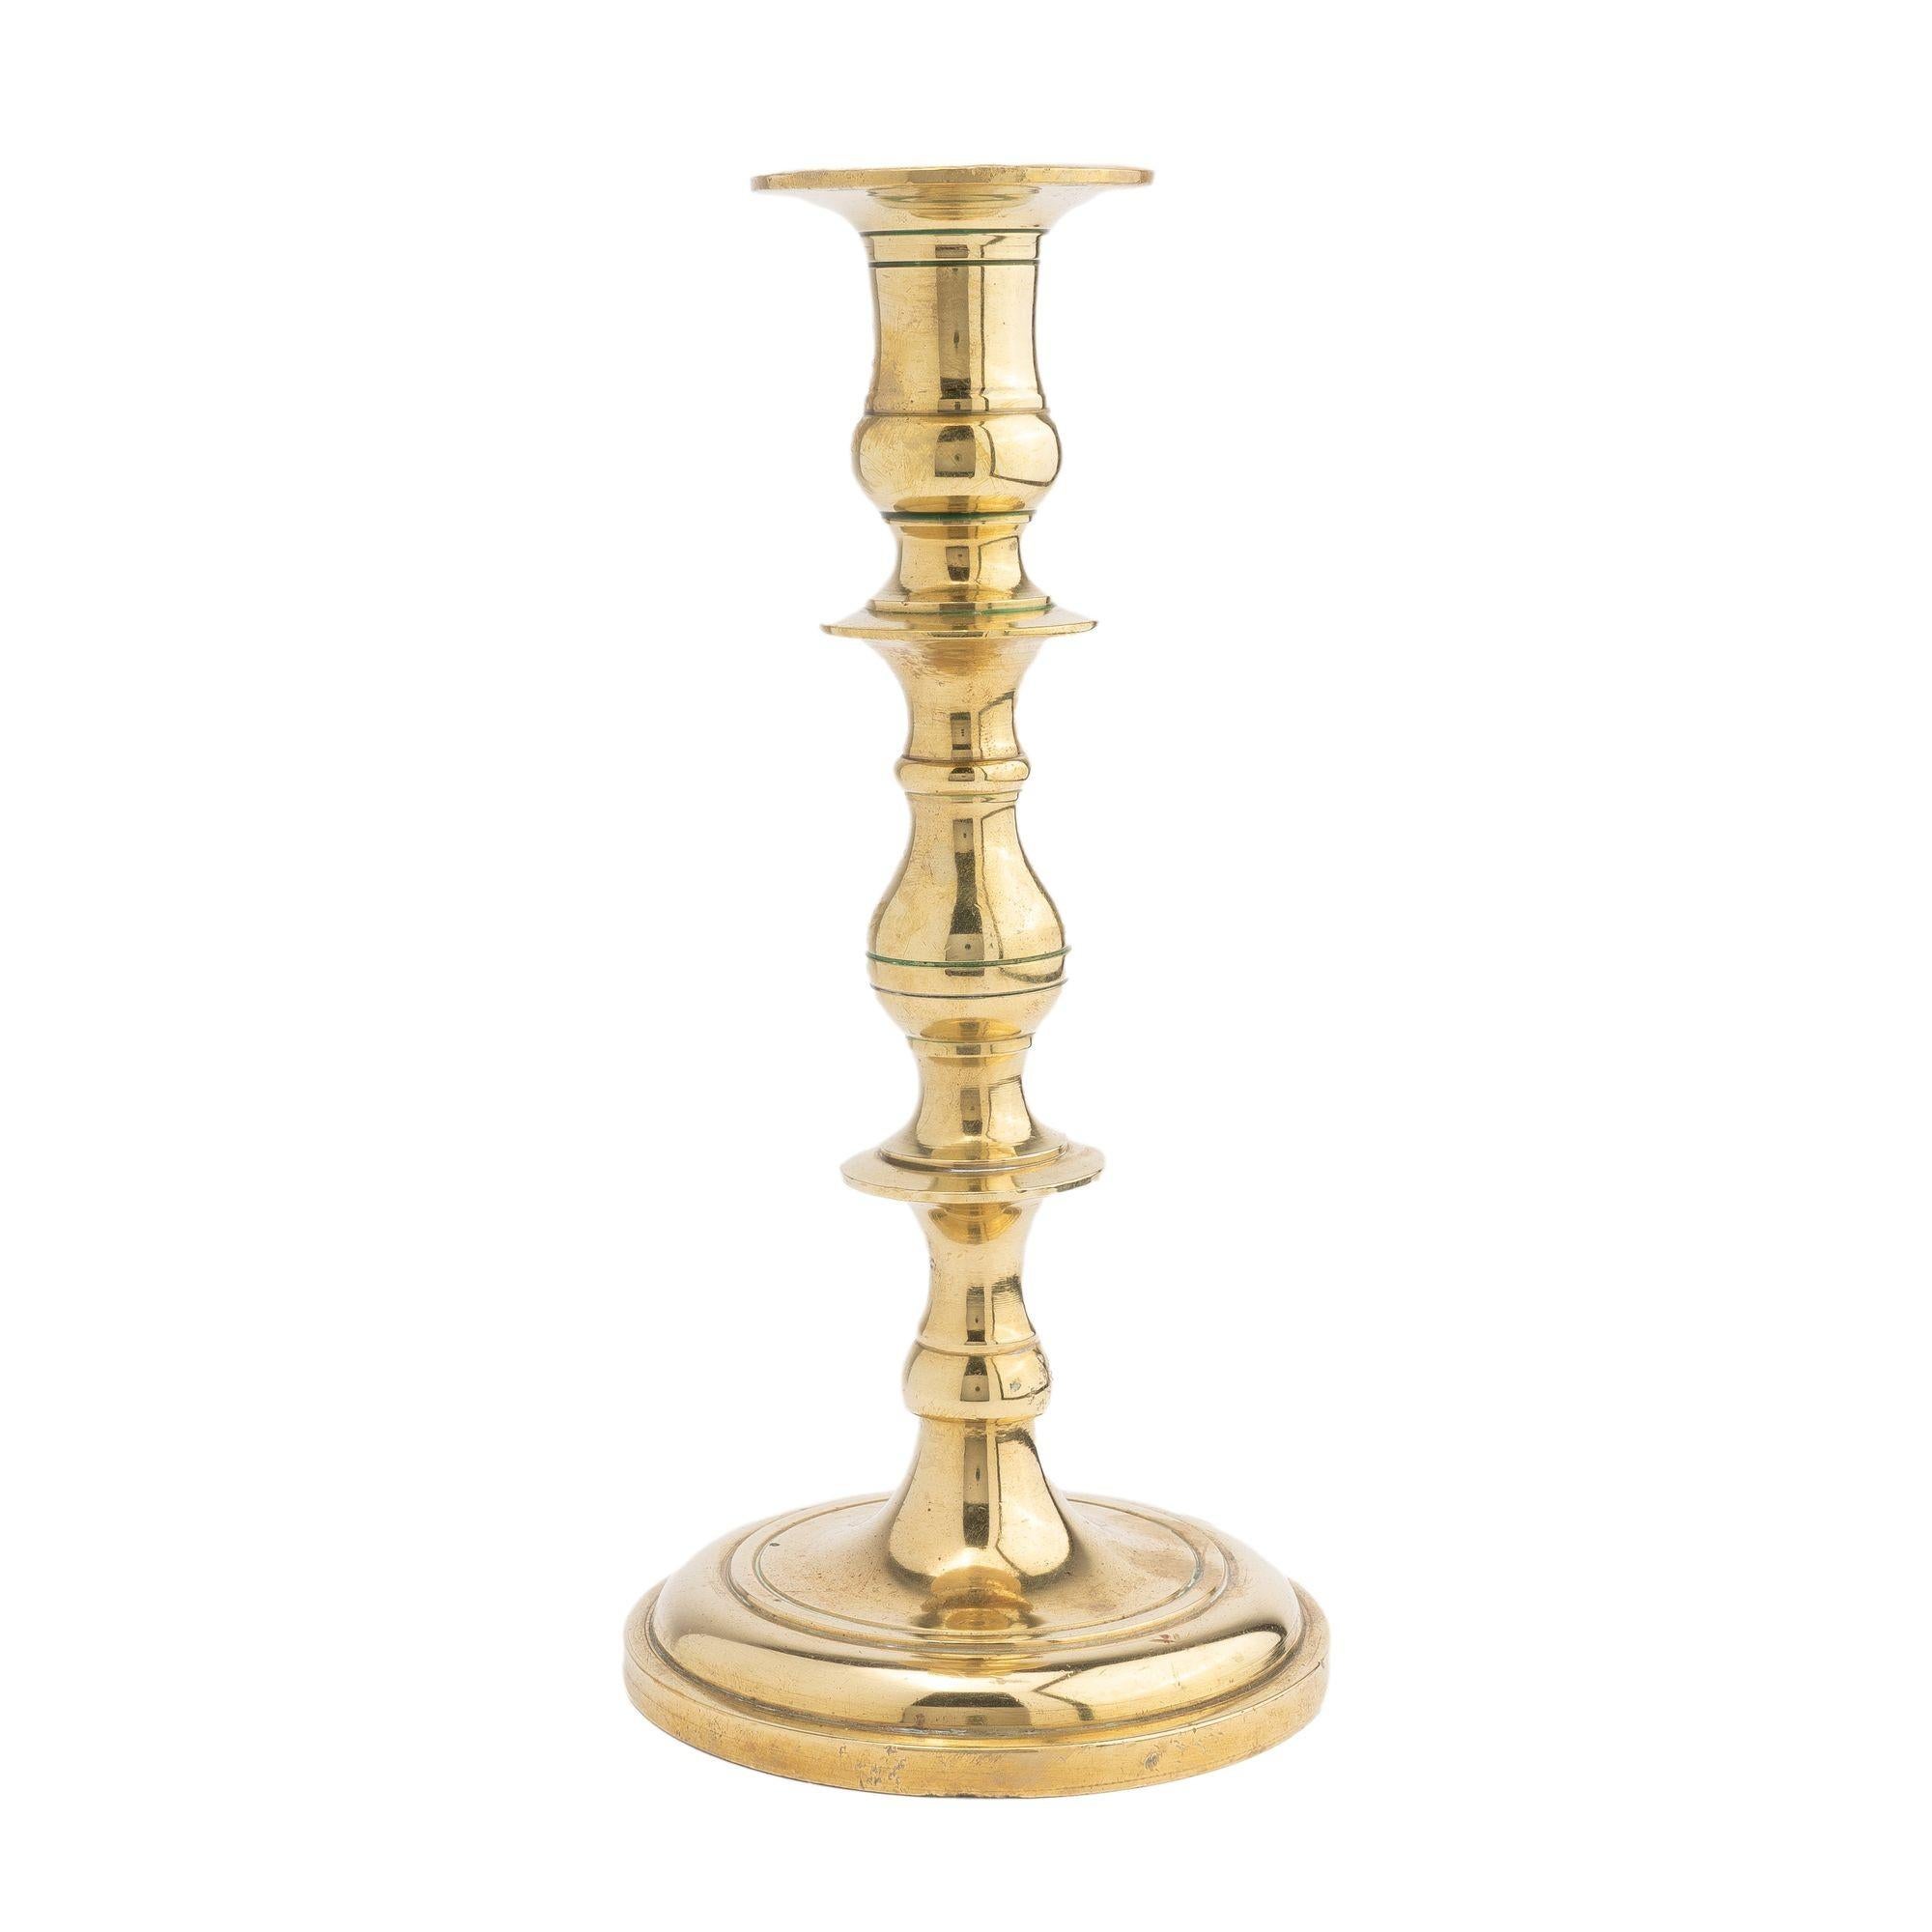 Core cast brass candlestick with a reel and knob shaft screwed to a circular domed base
Continental, 1700's.